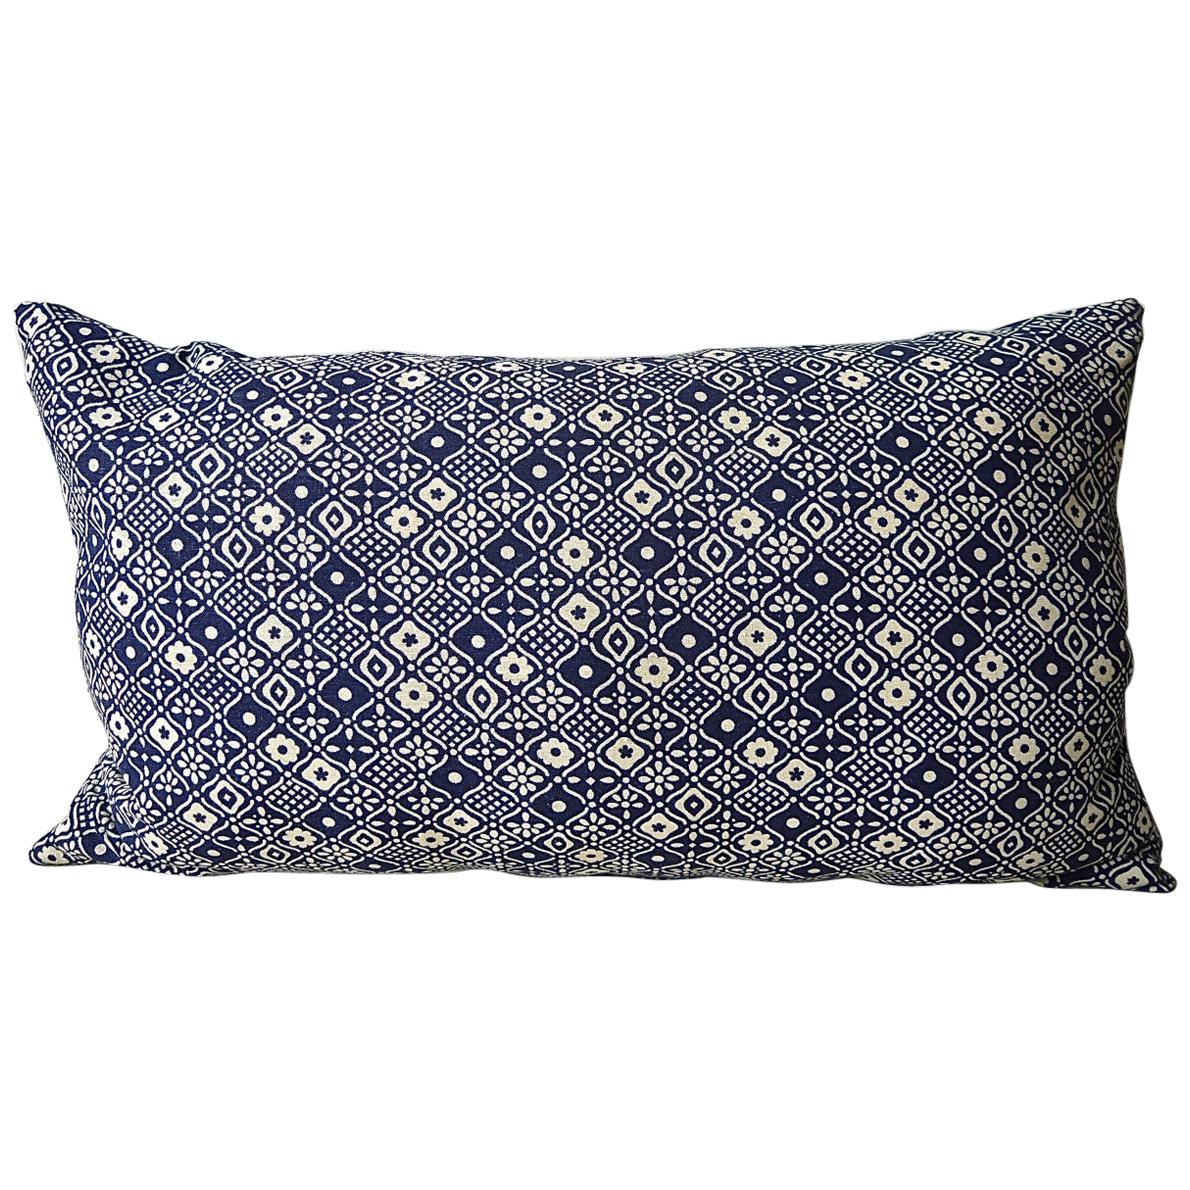 Indigo Blue and Off-White Print Cotton Pillow, French, Midcentury For Sale